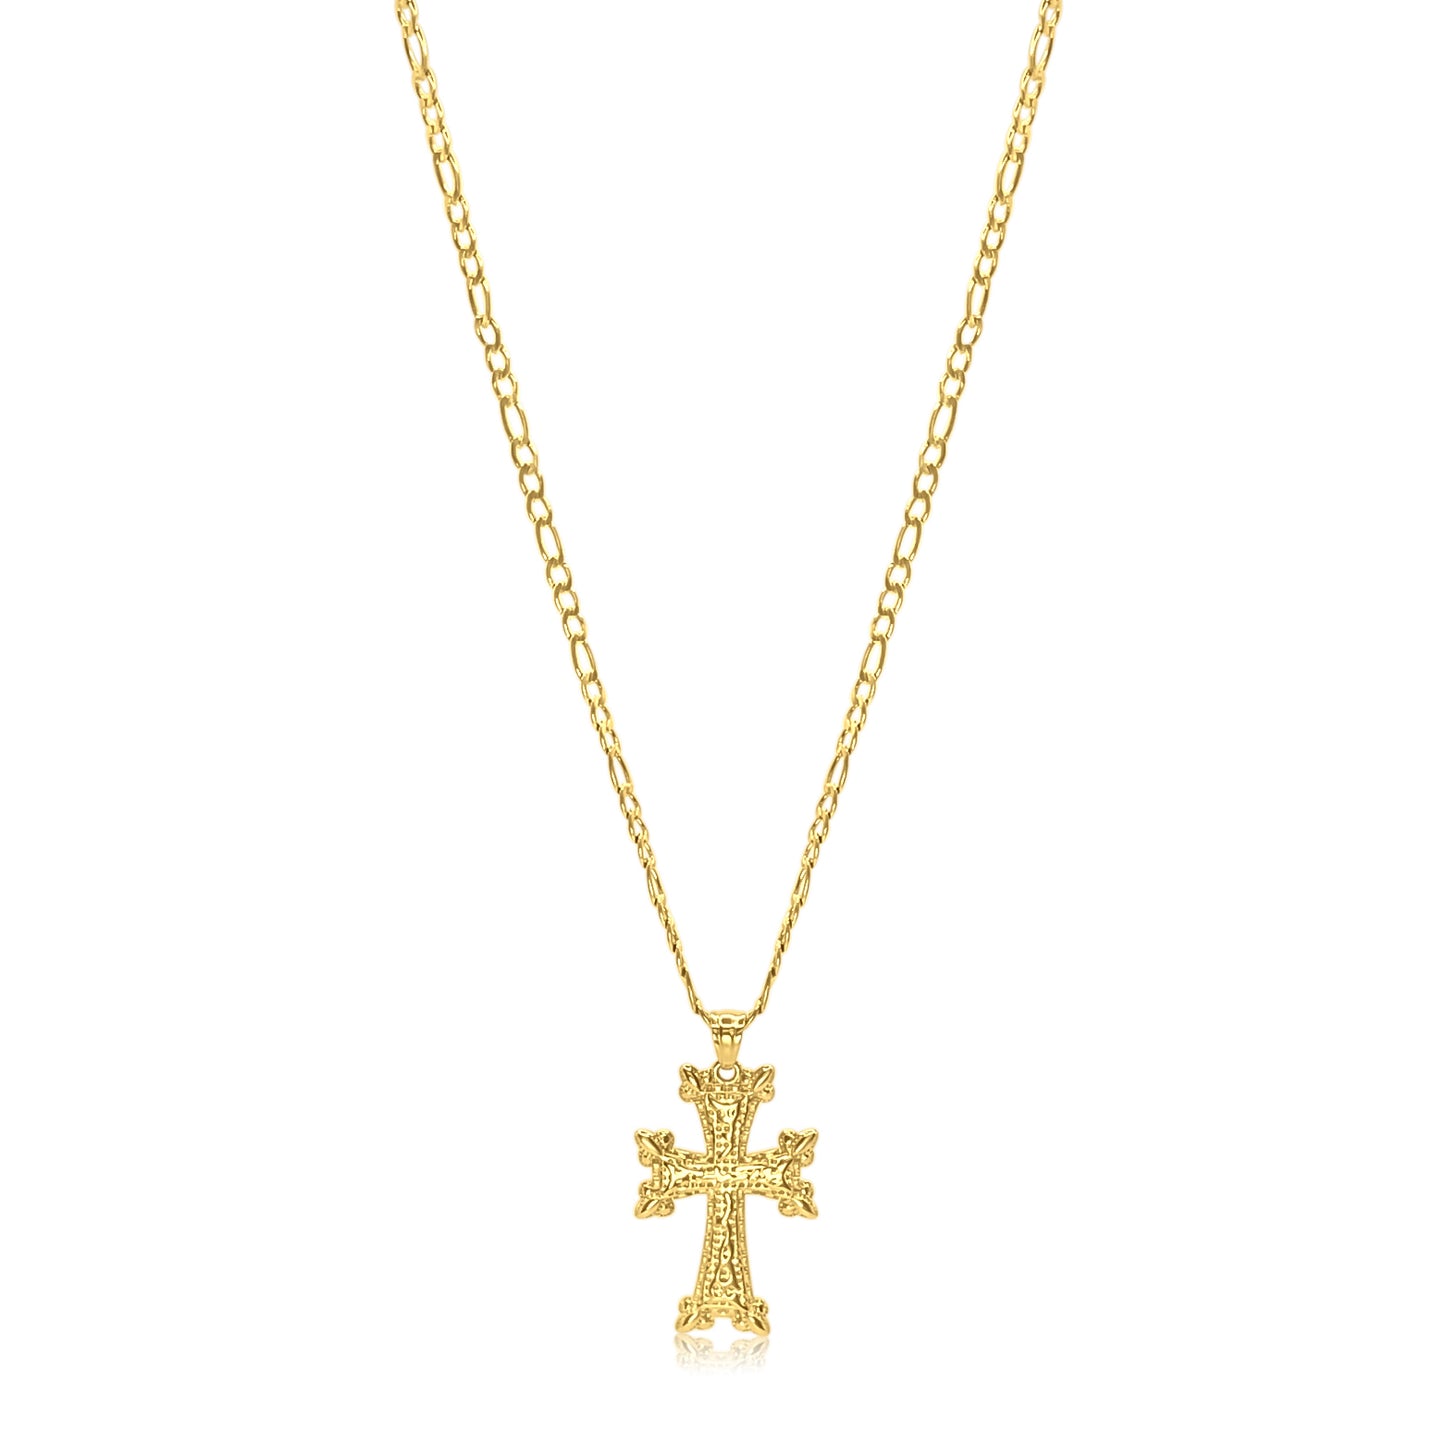 August Cross Necklace